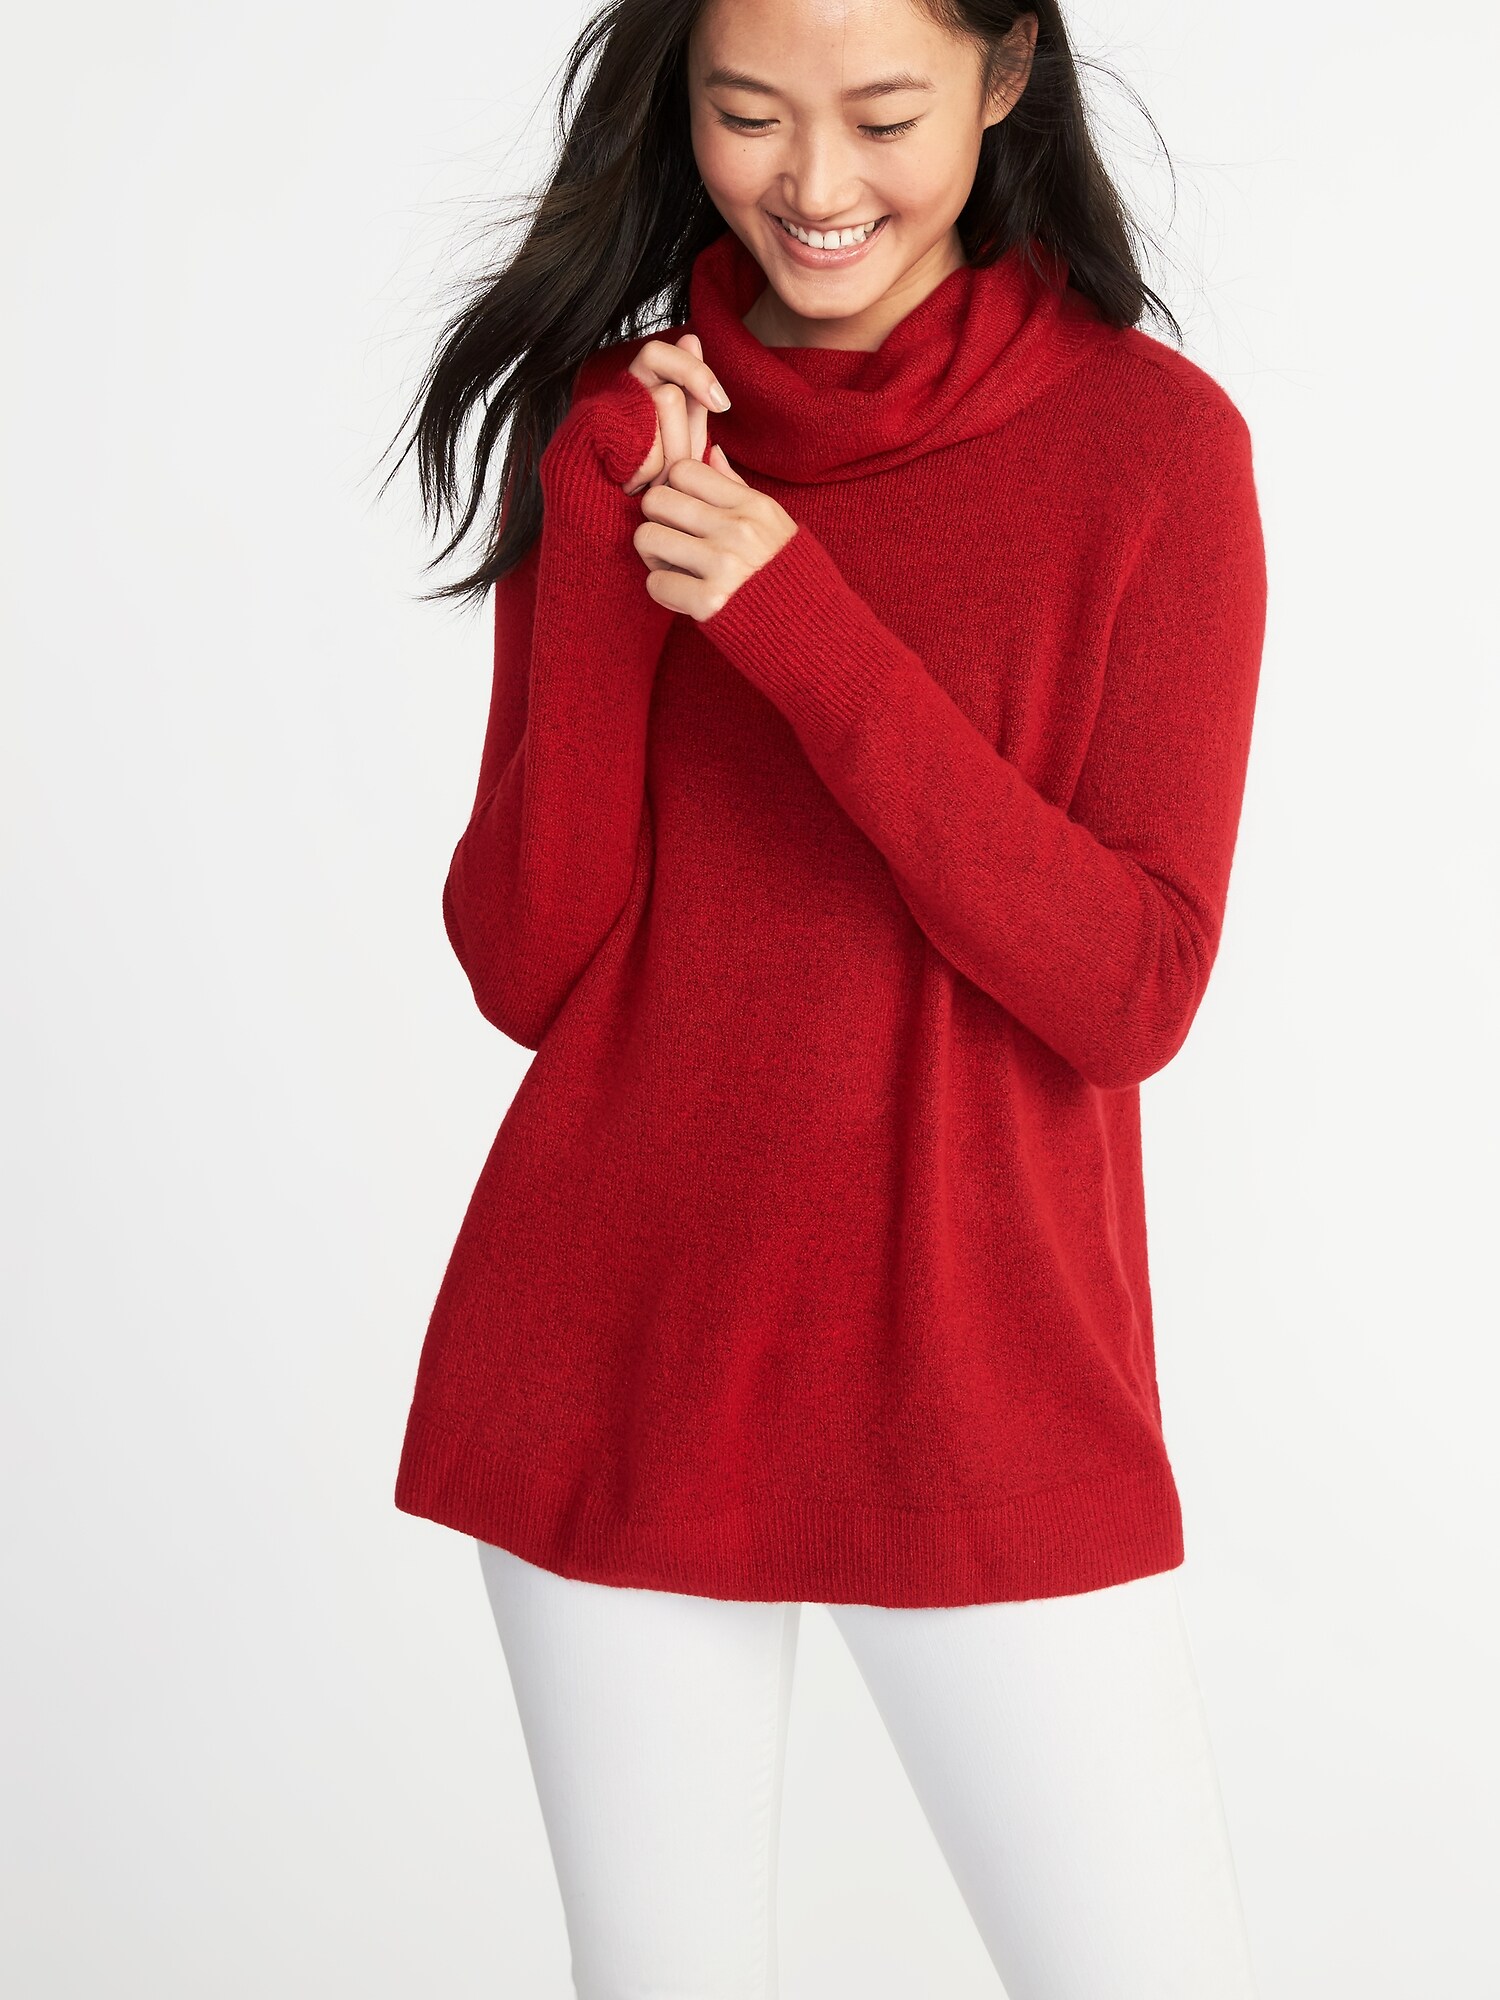 Classic Brushed-Knit Turtleneck Sweater for Women | Old Navy